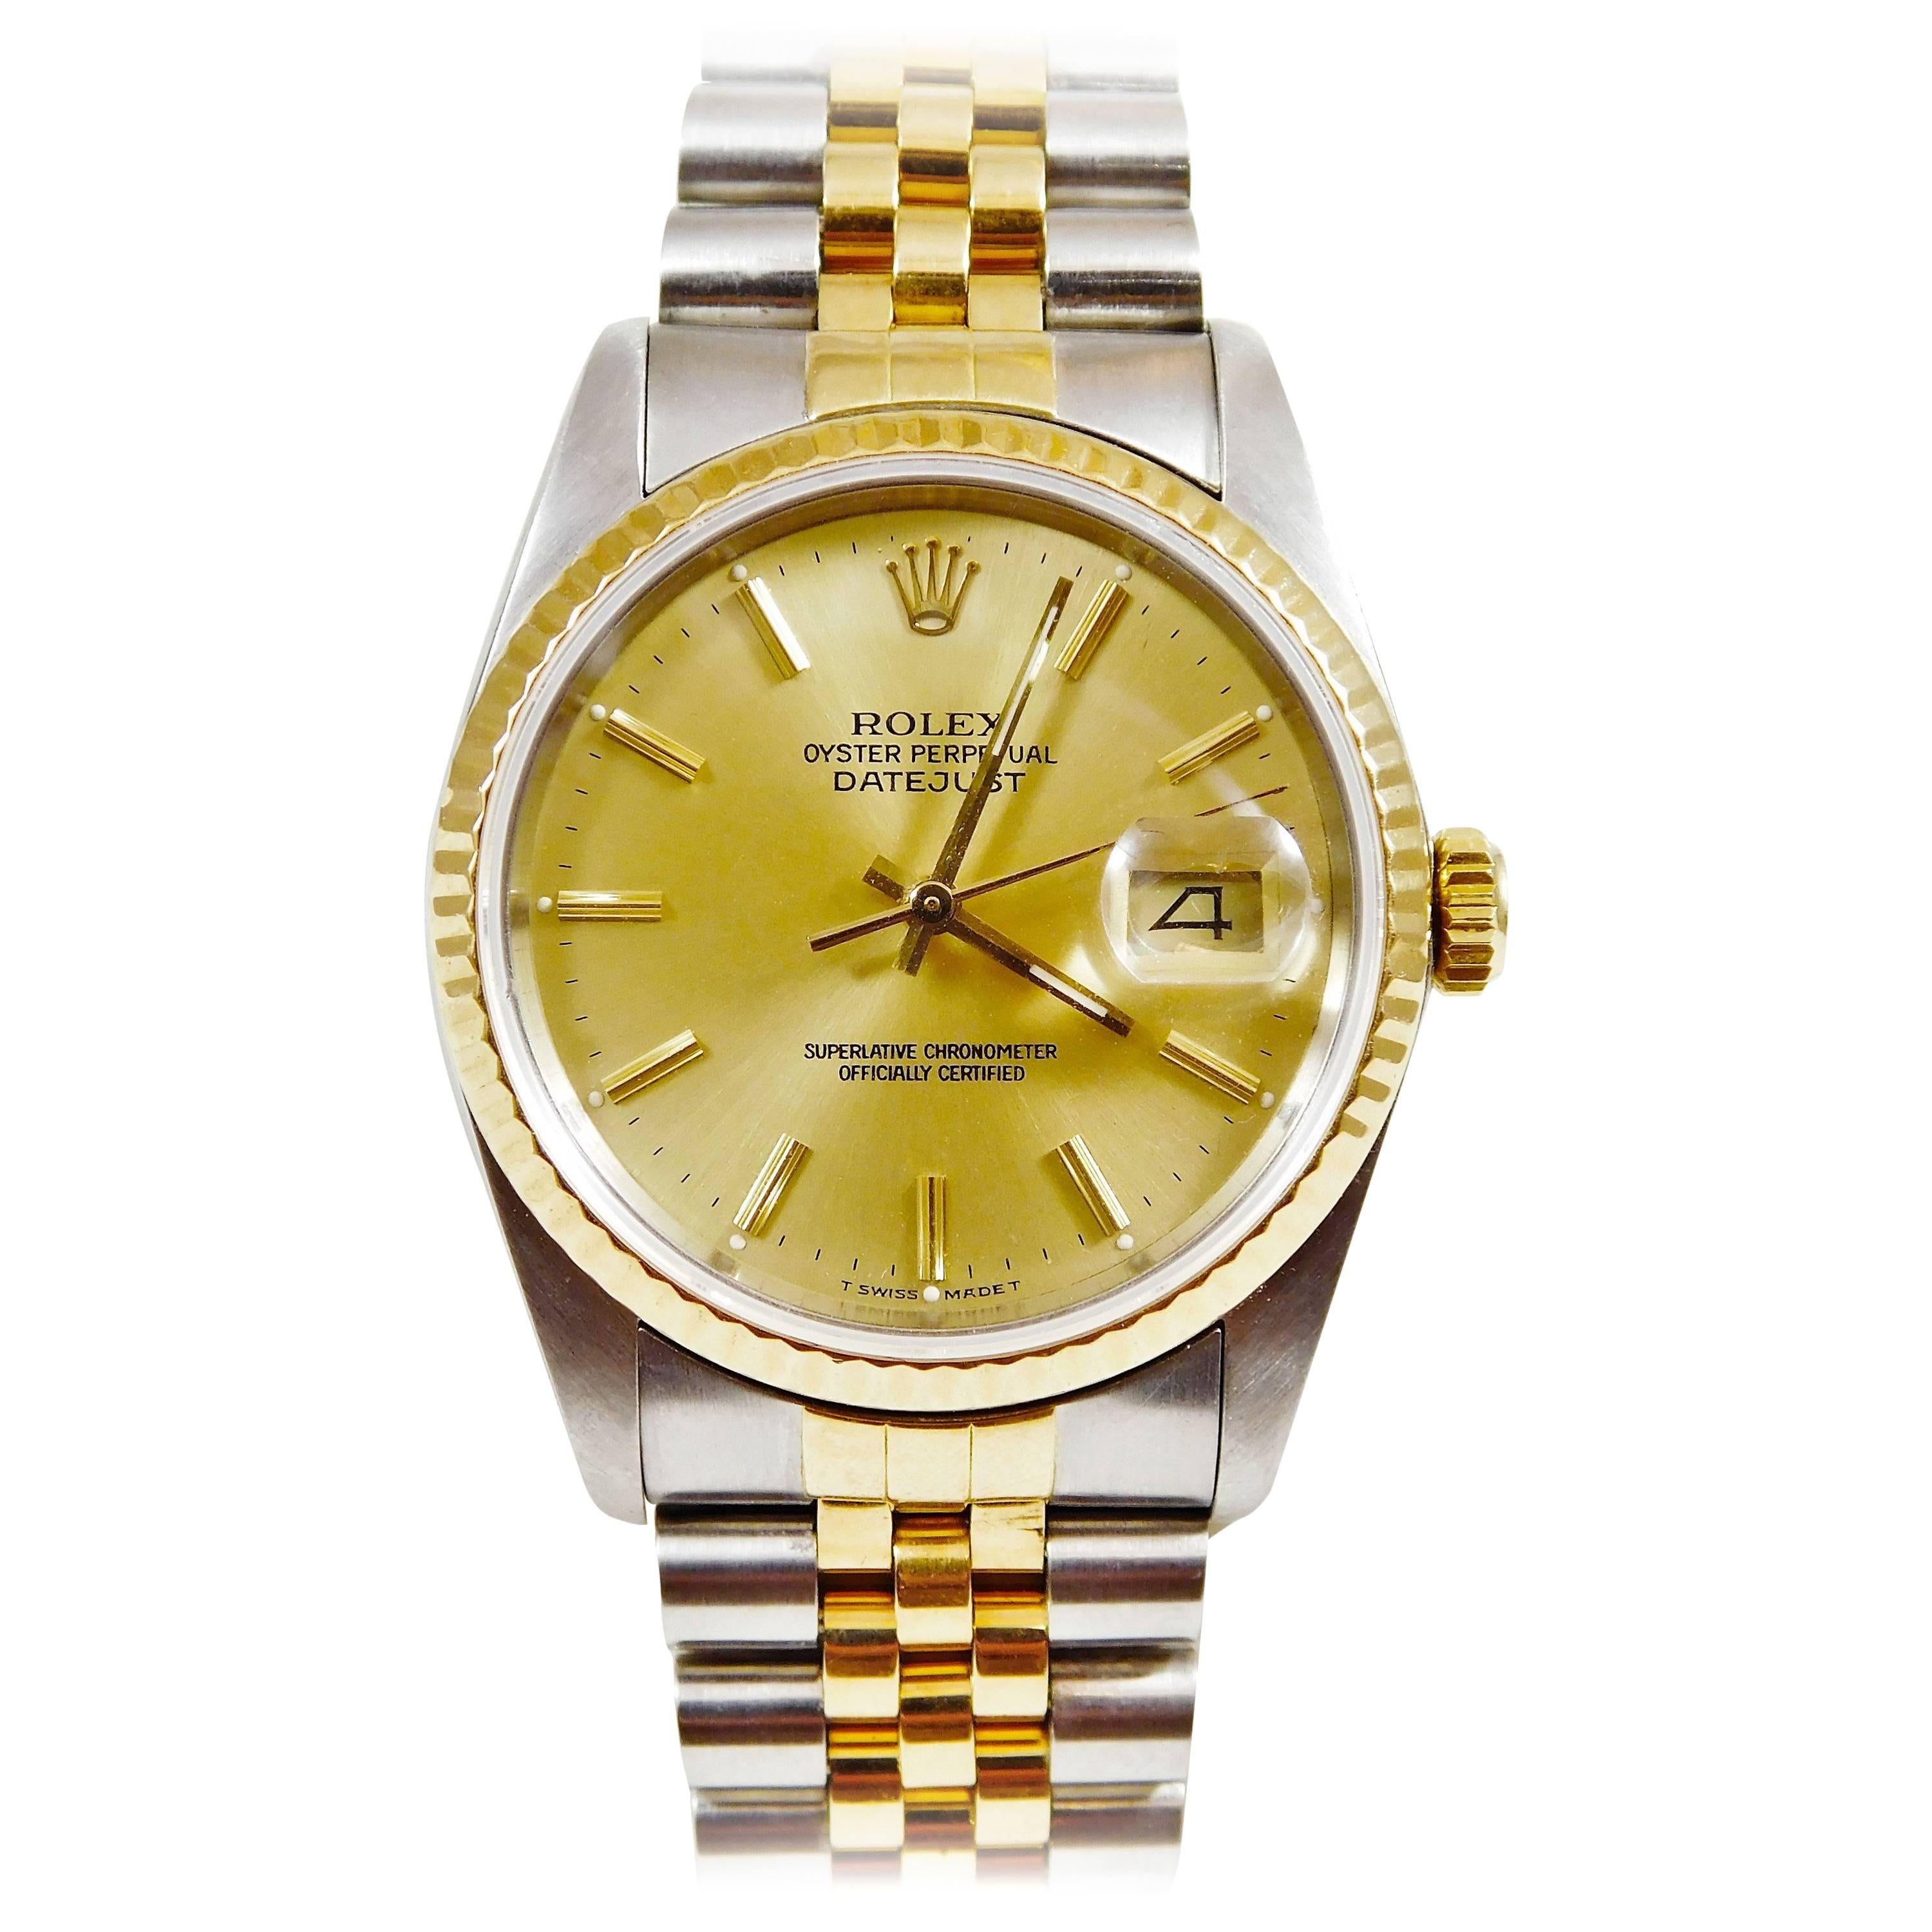 Rolex yellow gold Stainless Steel Oyster Perpetual Datejust Automatic Wristwatch